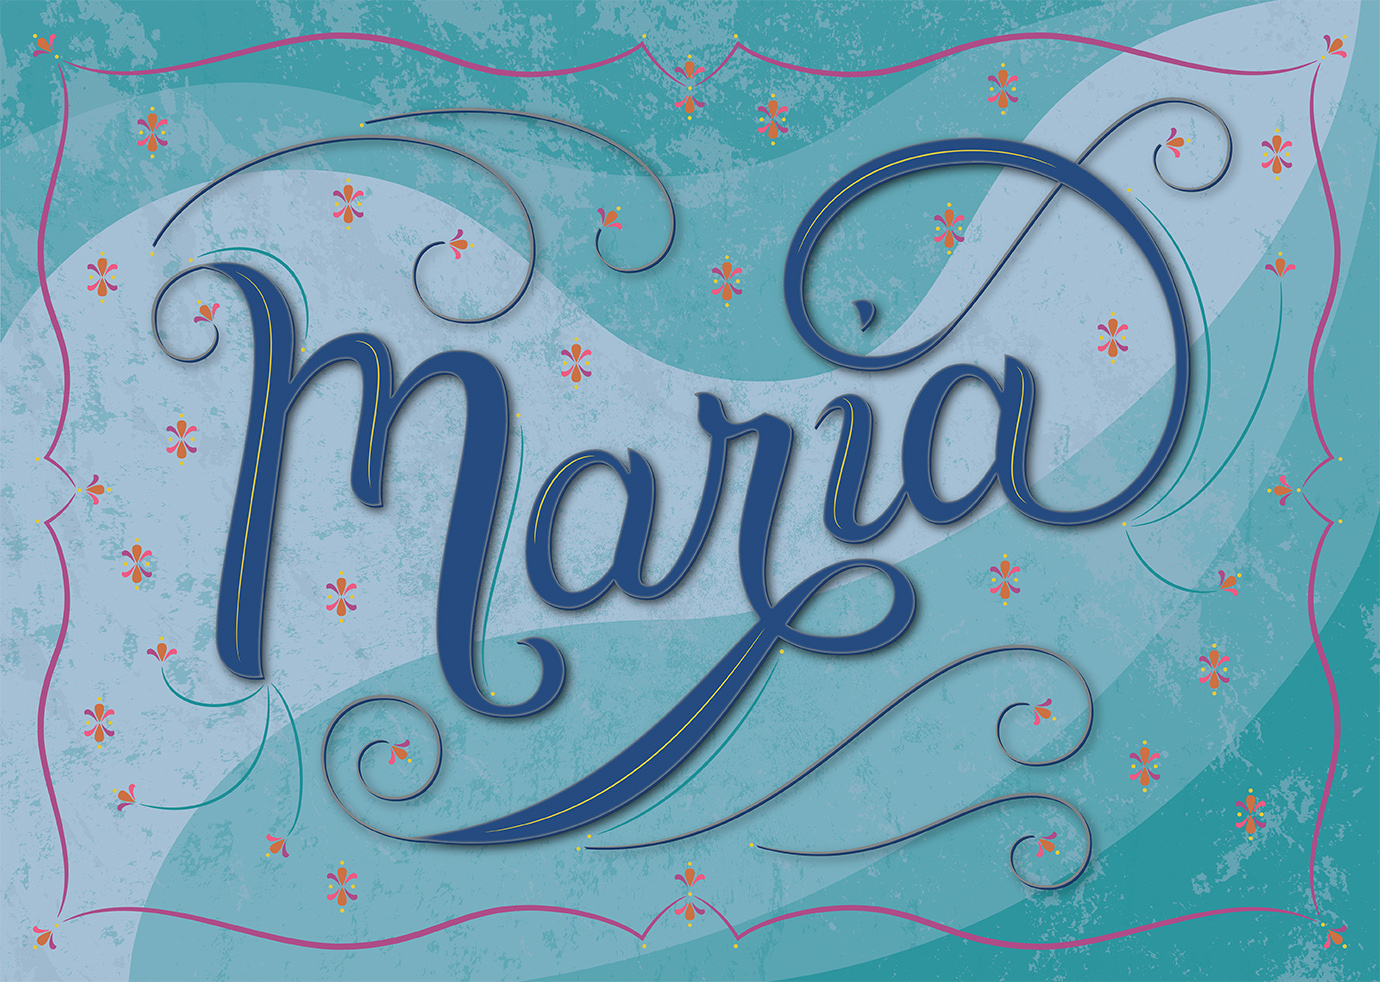 Lettering piece "Maria"